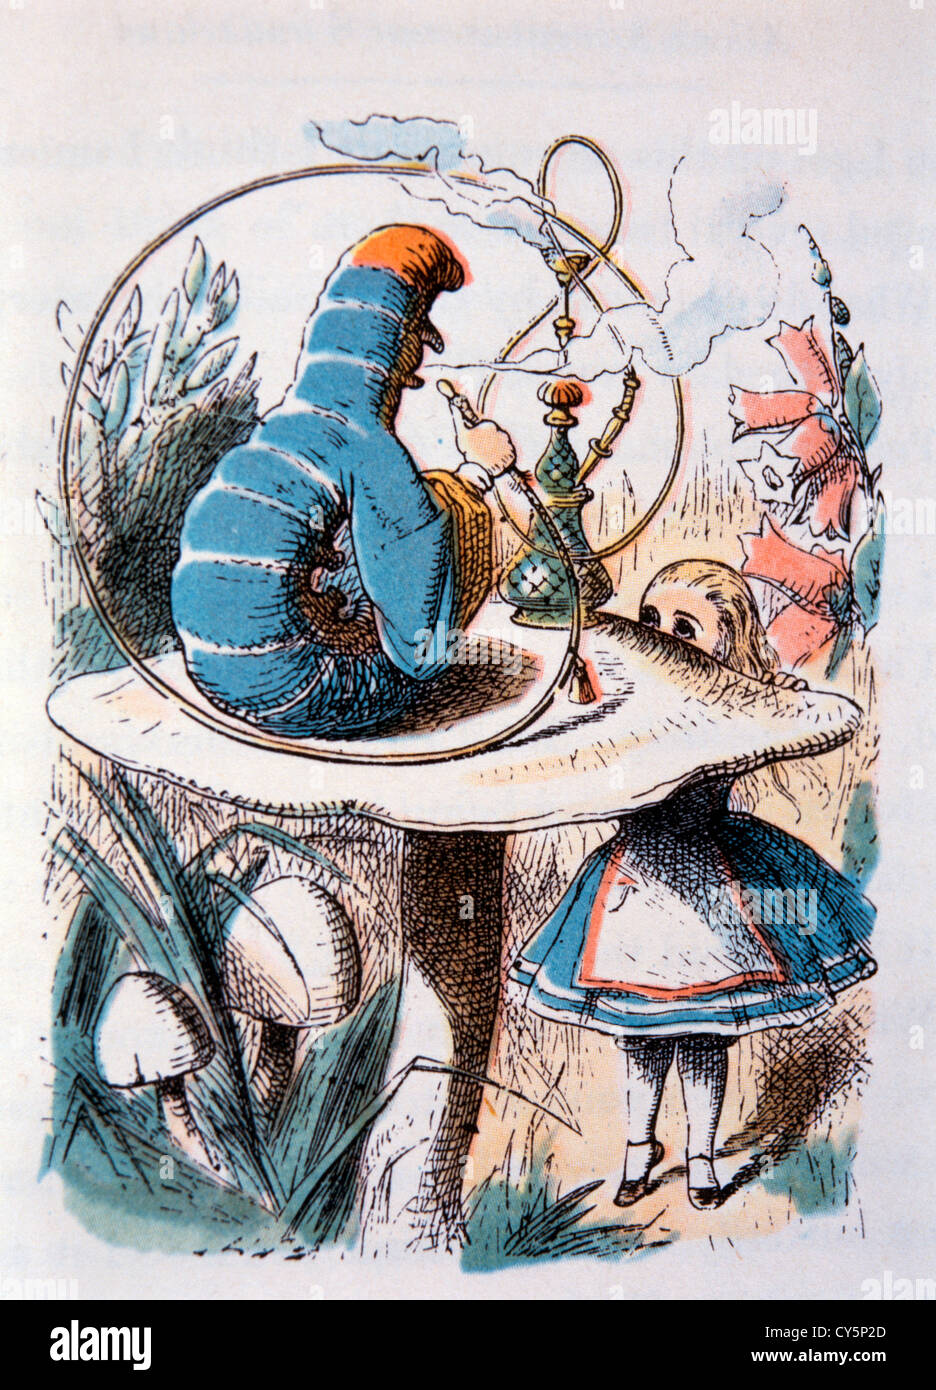 Advice From a Caterpillar,  Alice's Adventure in Wonderland by Lewis Carroll, Hand- Colored Illustration, Circa 1865 Stock Photo